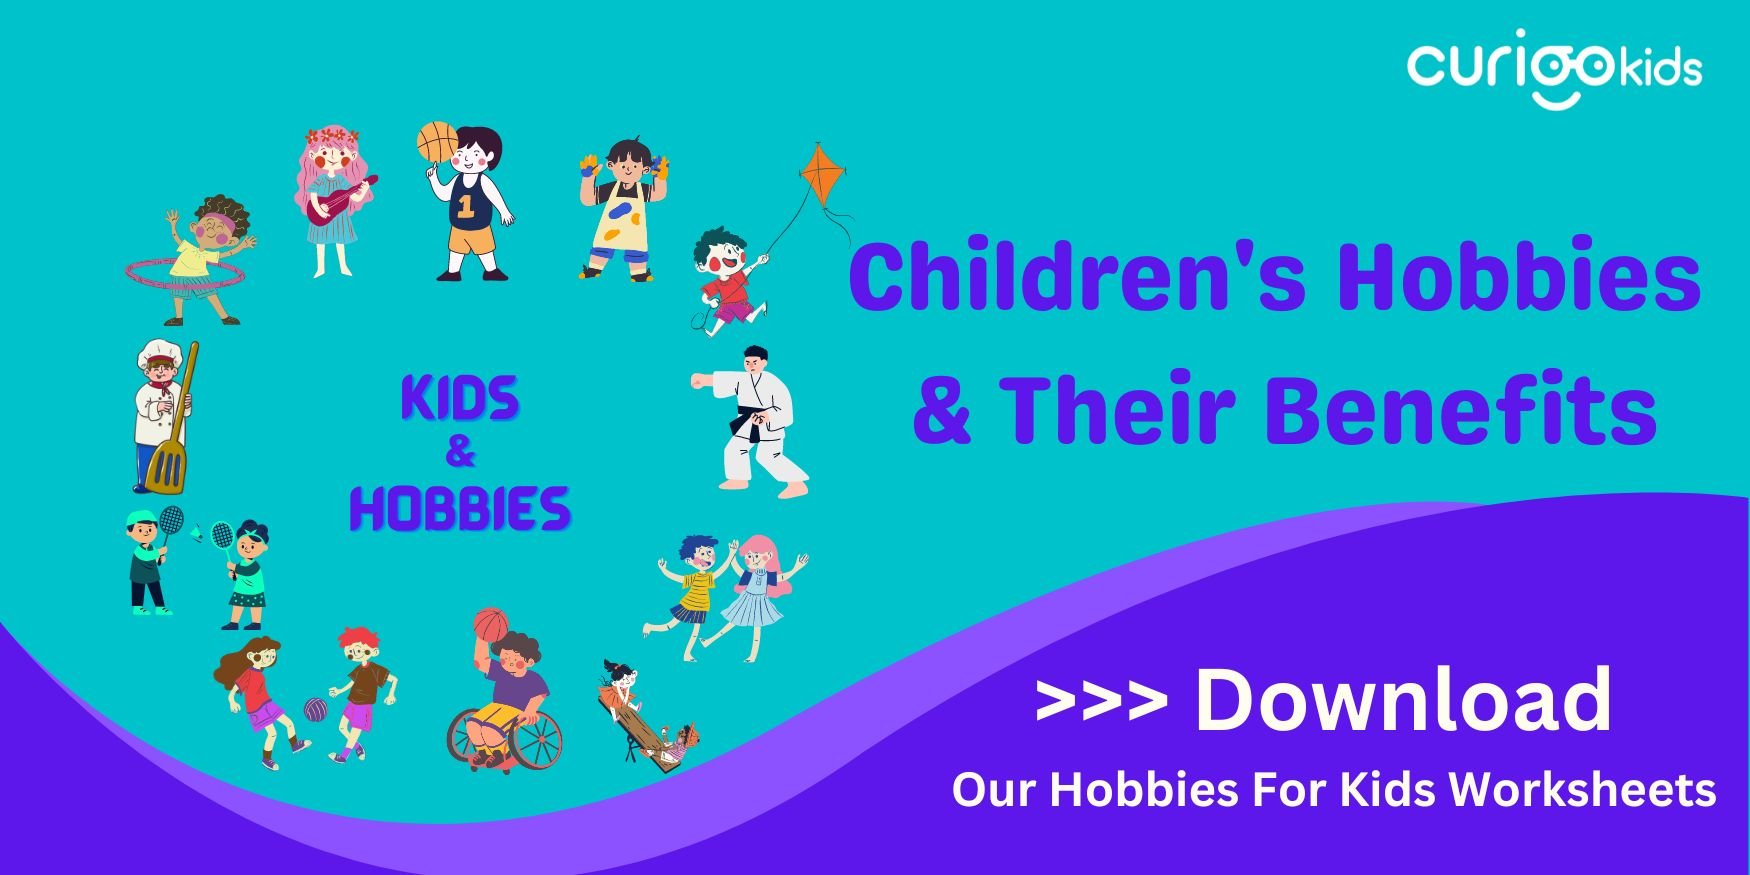 Importance of Children's hobbies and their benefits